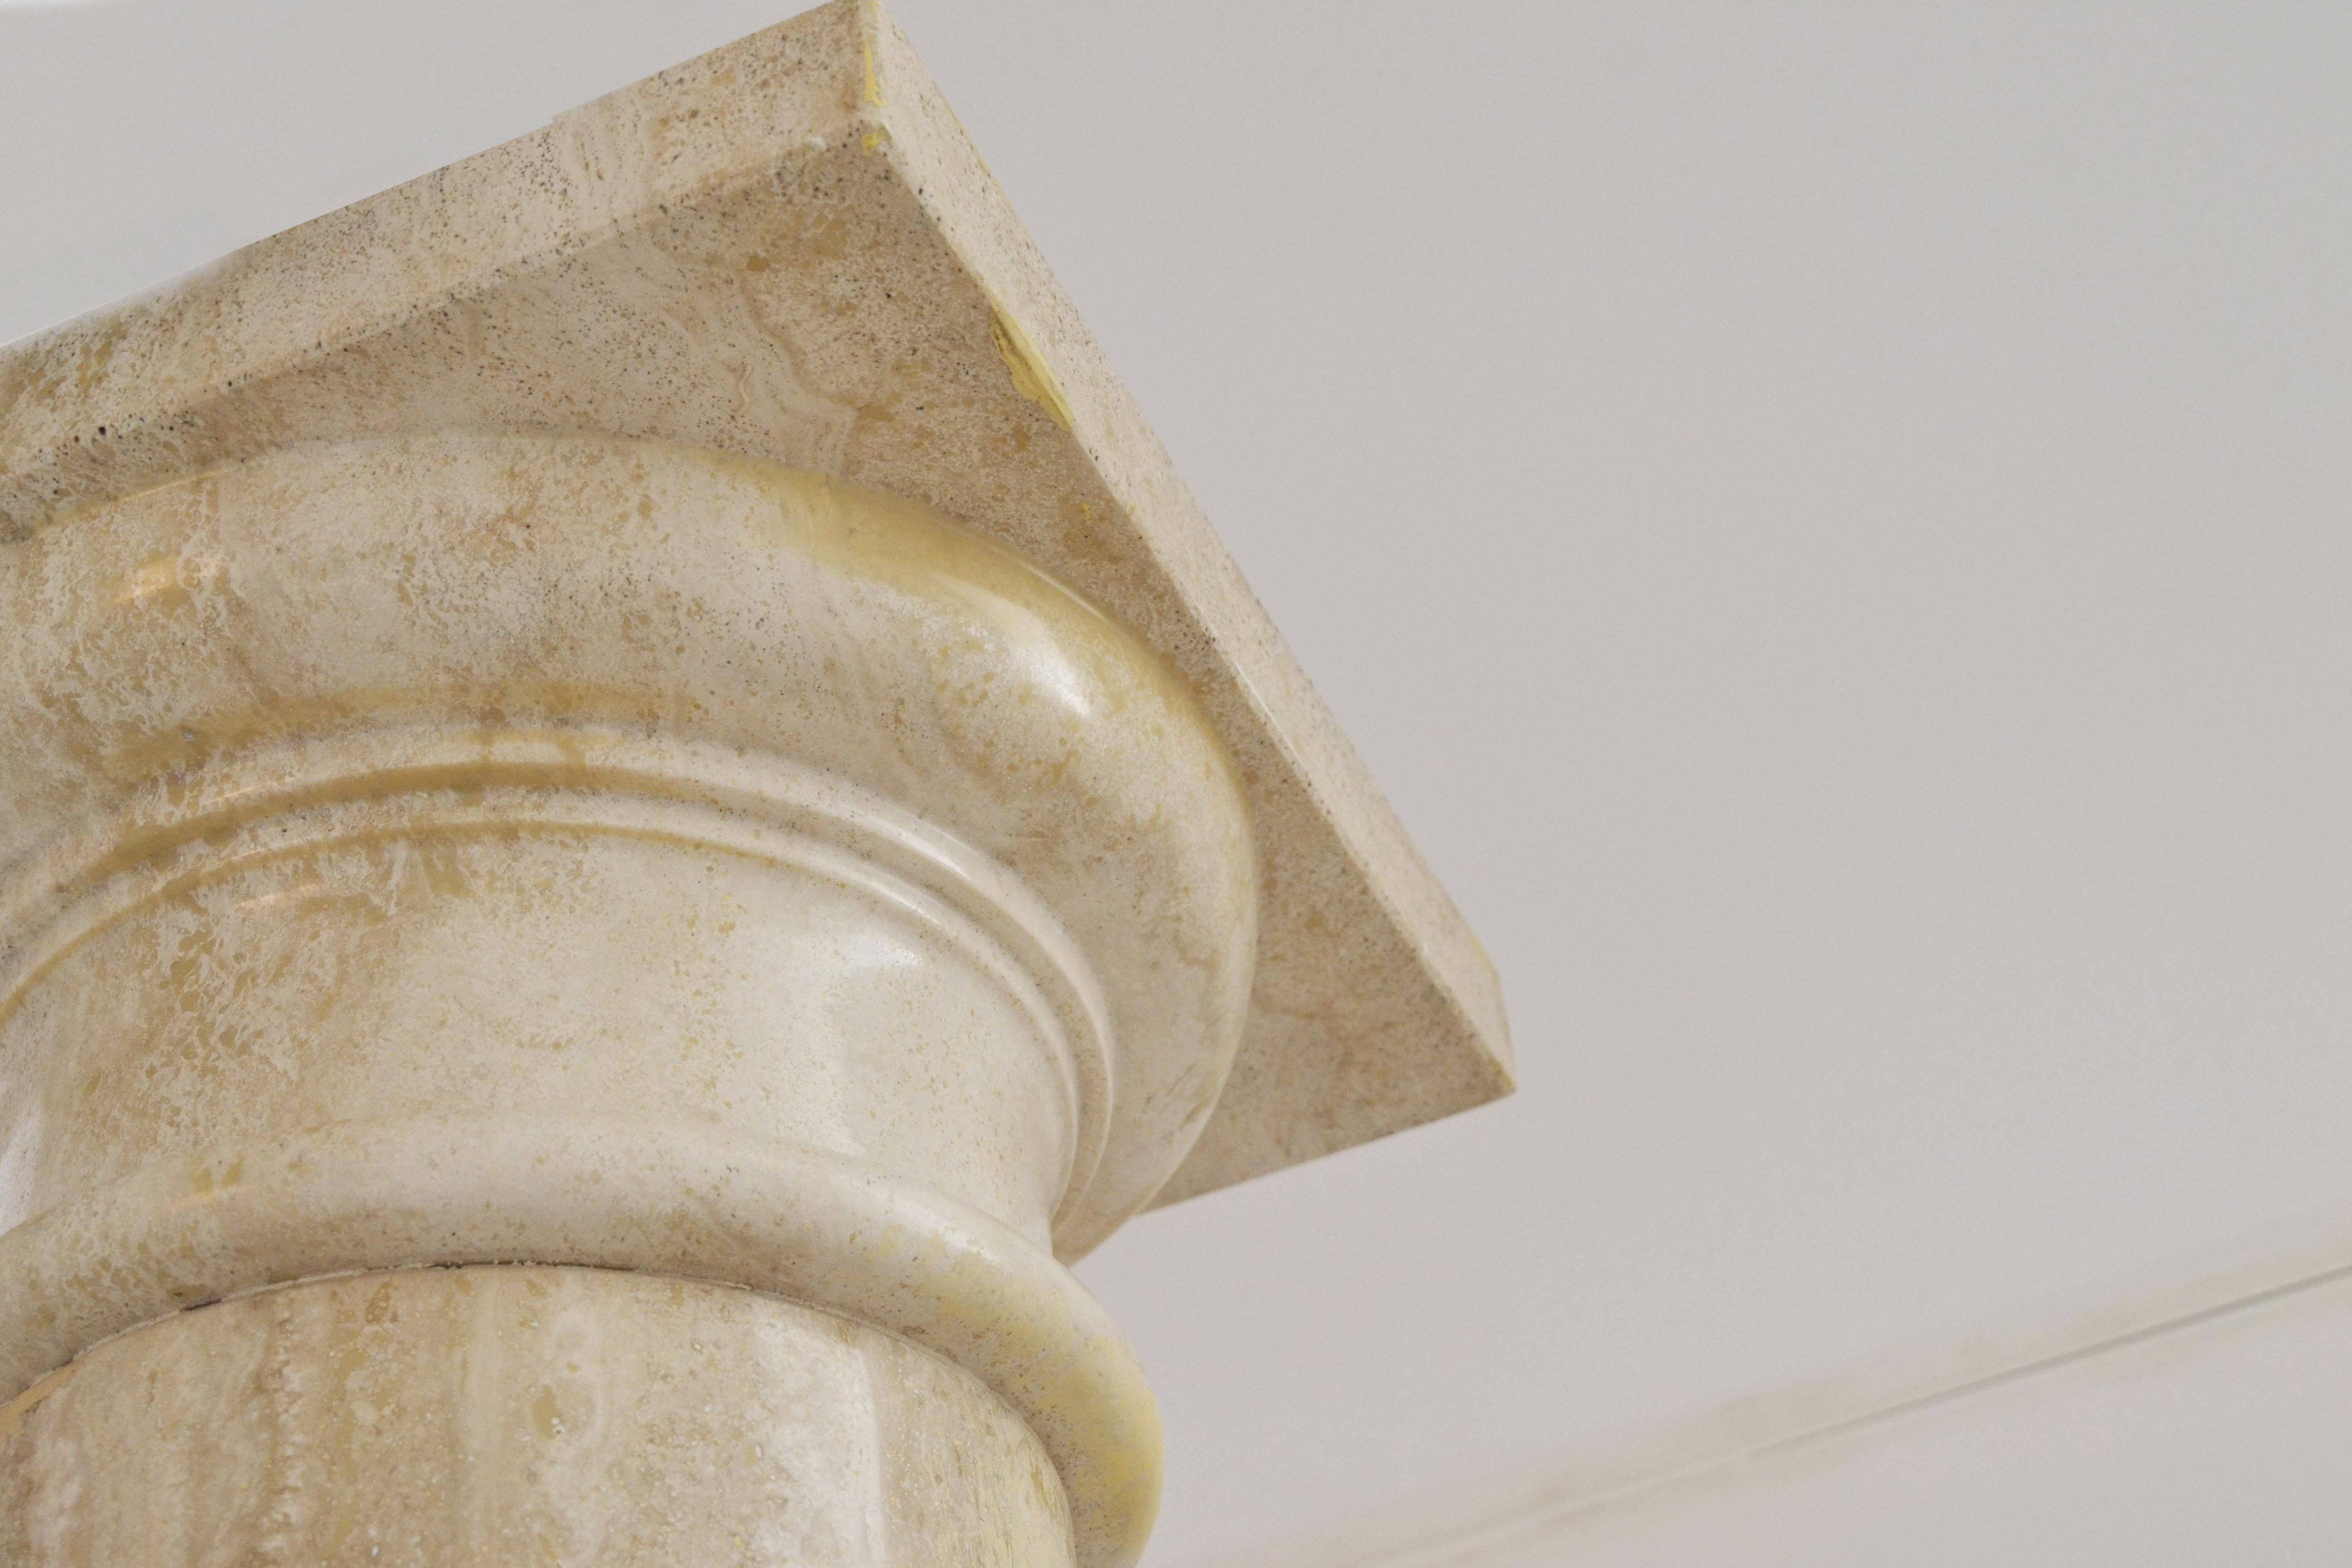 A gorgeous classical Roman style column or pillar in an incredible Italian travertine limestone sourced from Italy.

This is a grand piece which will come up to or above head height for most people.

It has a lovely natural color with which